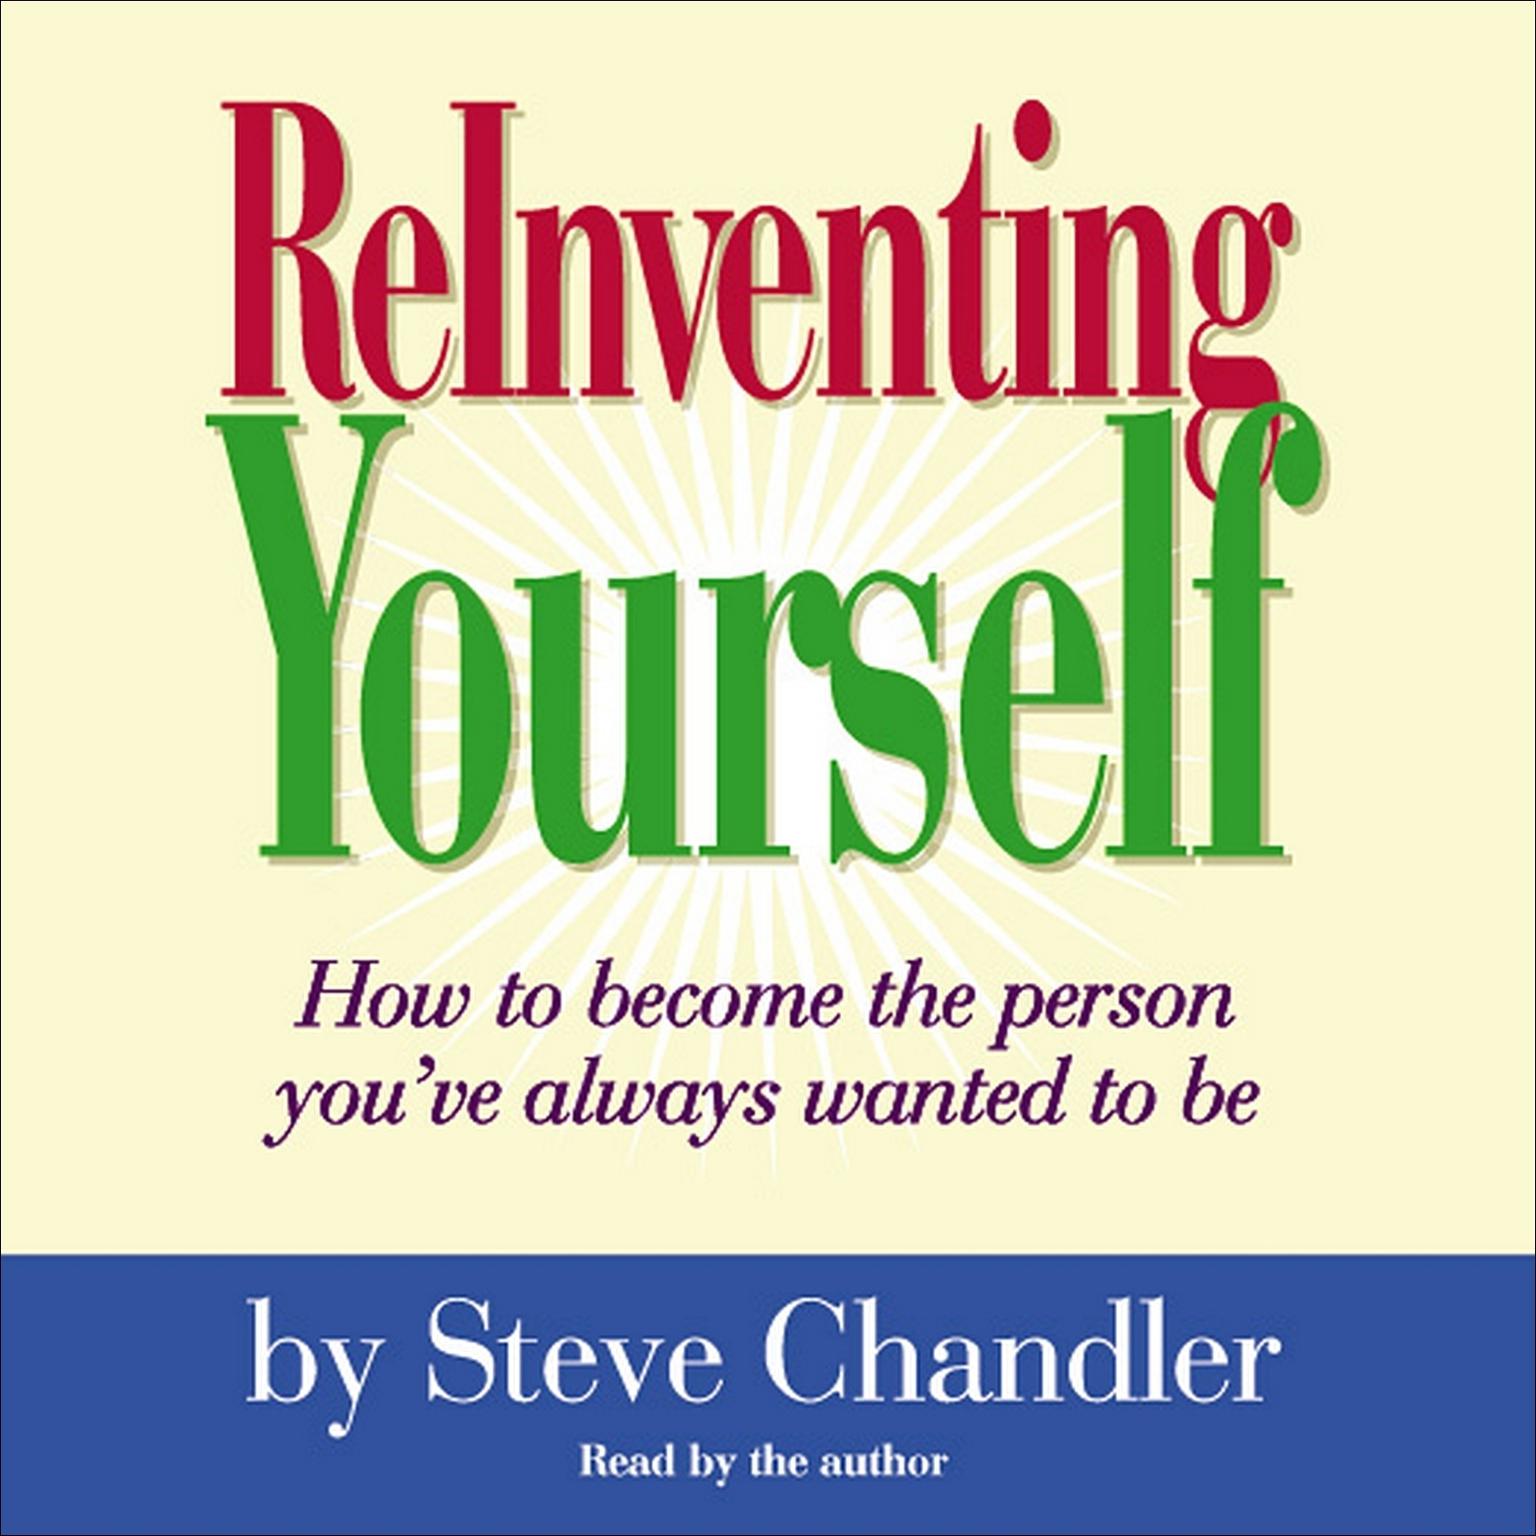 ReInventing Yourself (Abridged): How To Become the Person You Always Wanted to Be Audiobook, by Steve Chandler